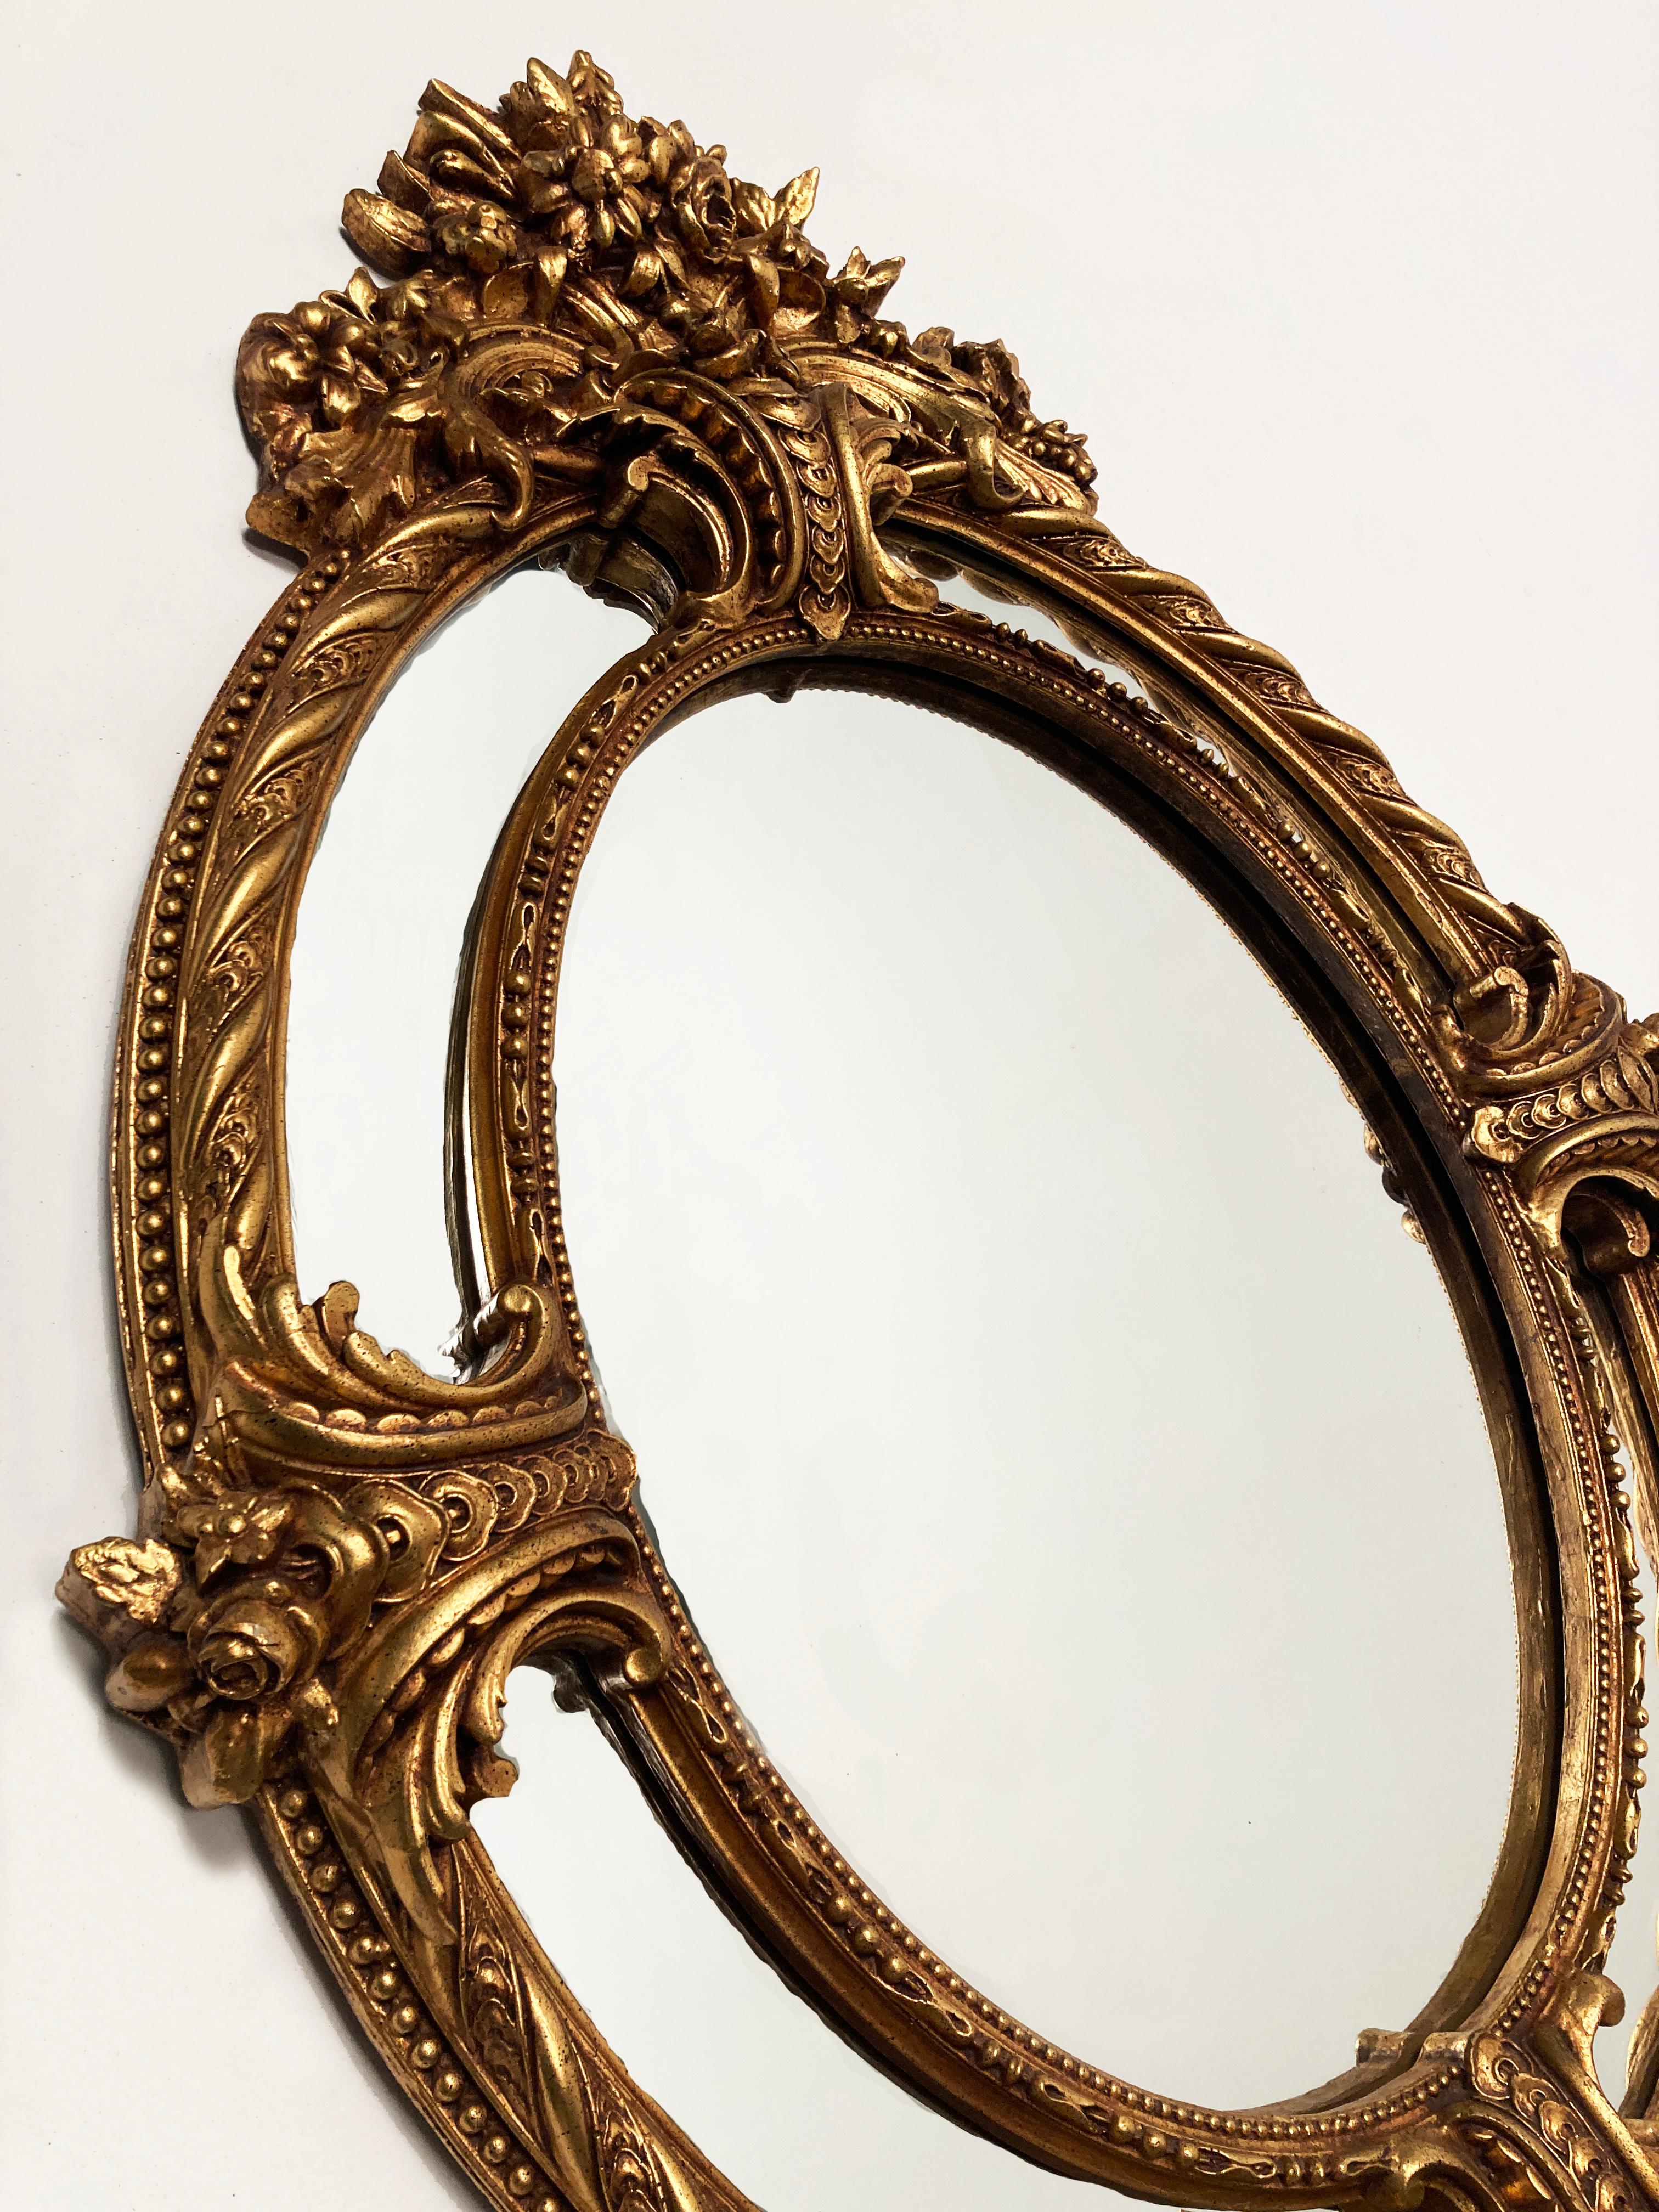 If you have been searching for that statement piece in a hall or over a particular furniture arrangement, look no further. This is a most stunning example of elegance. This is a French Louis XV style gilt carved oval mirror with bouquet of flowers